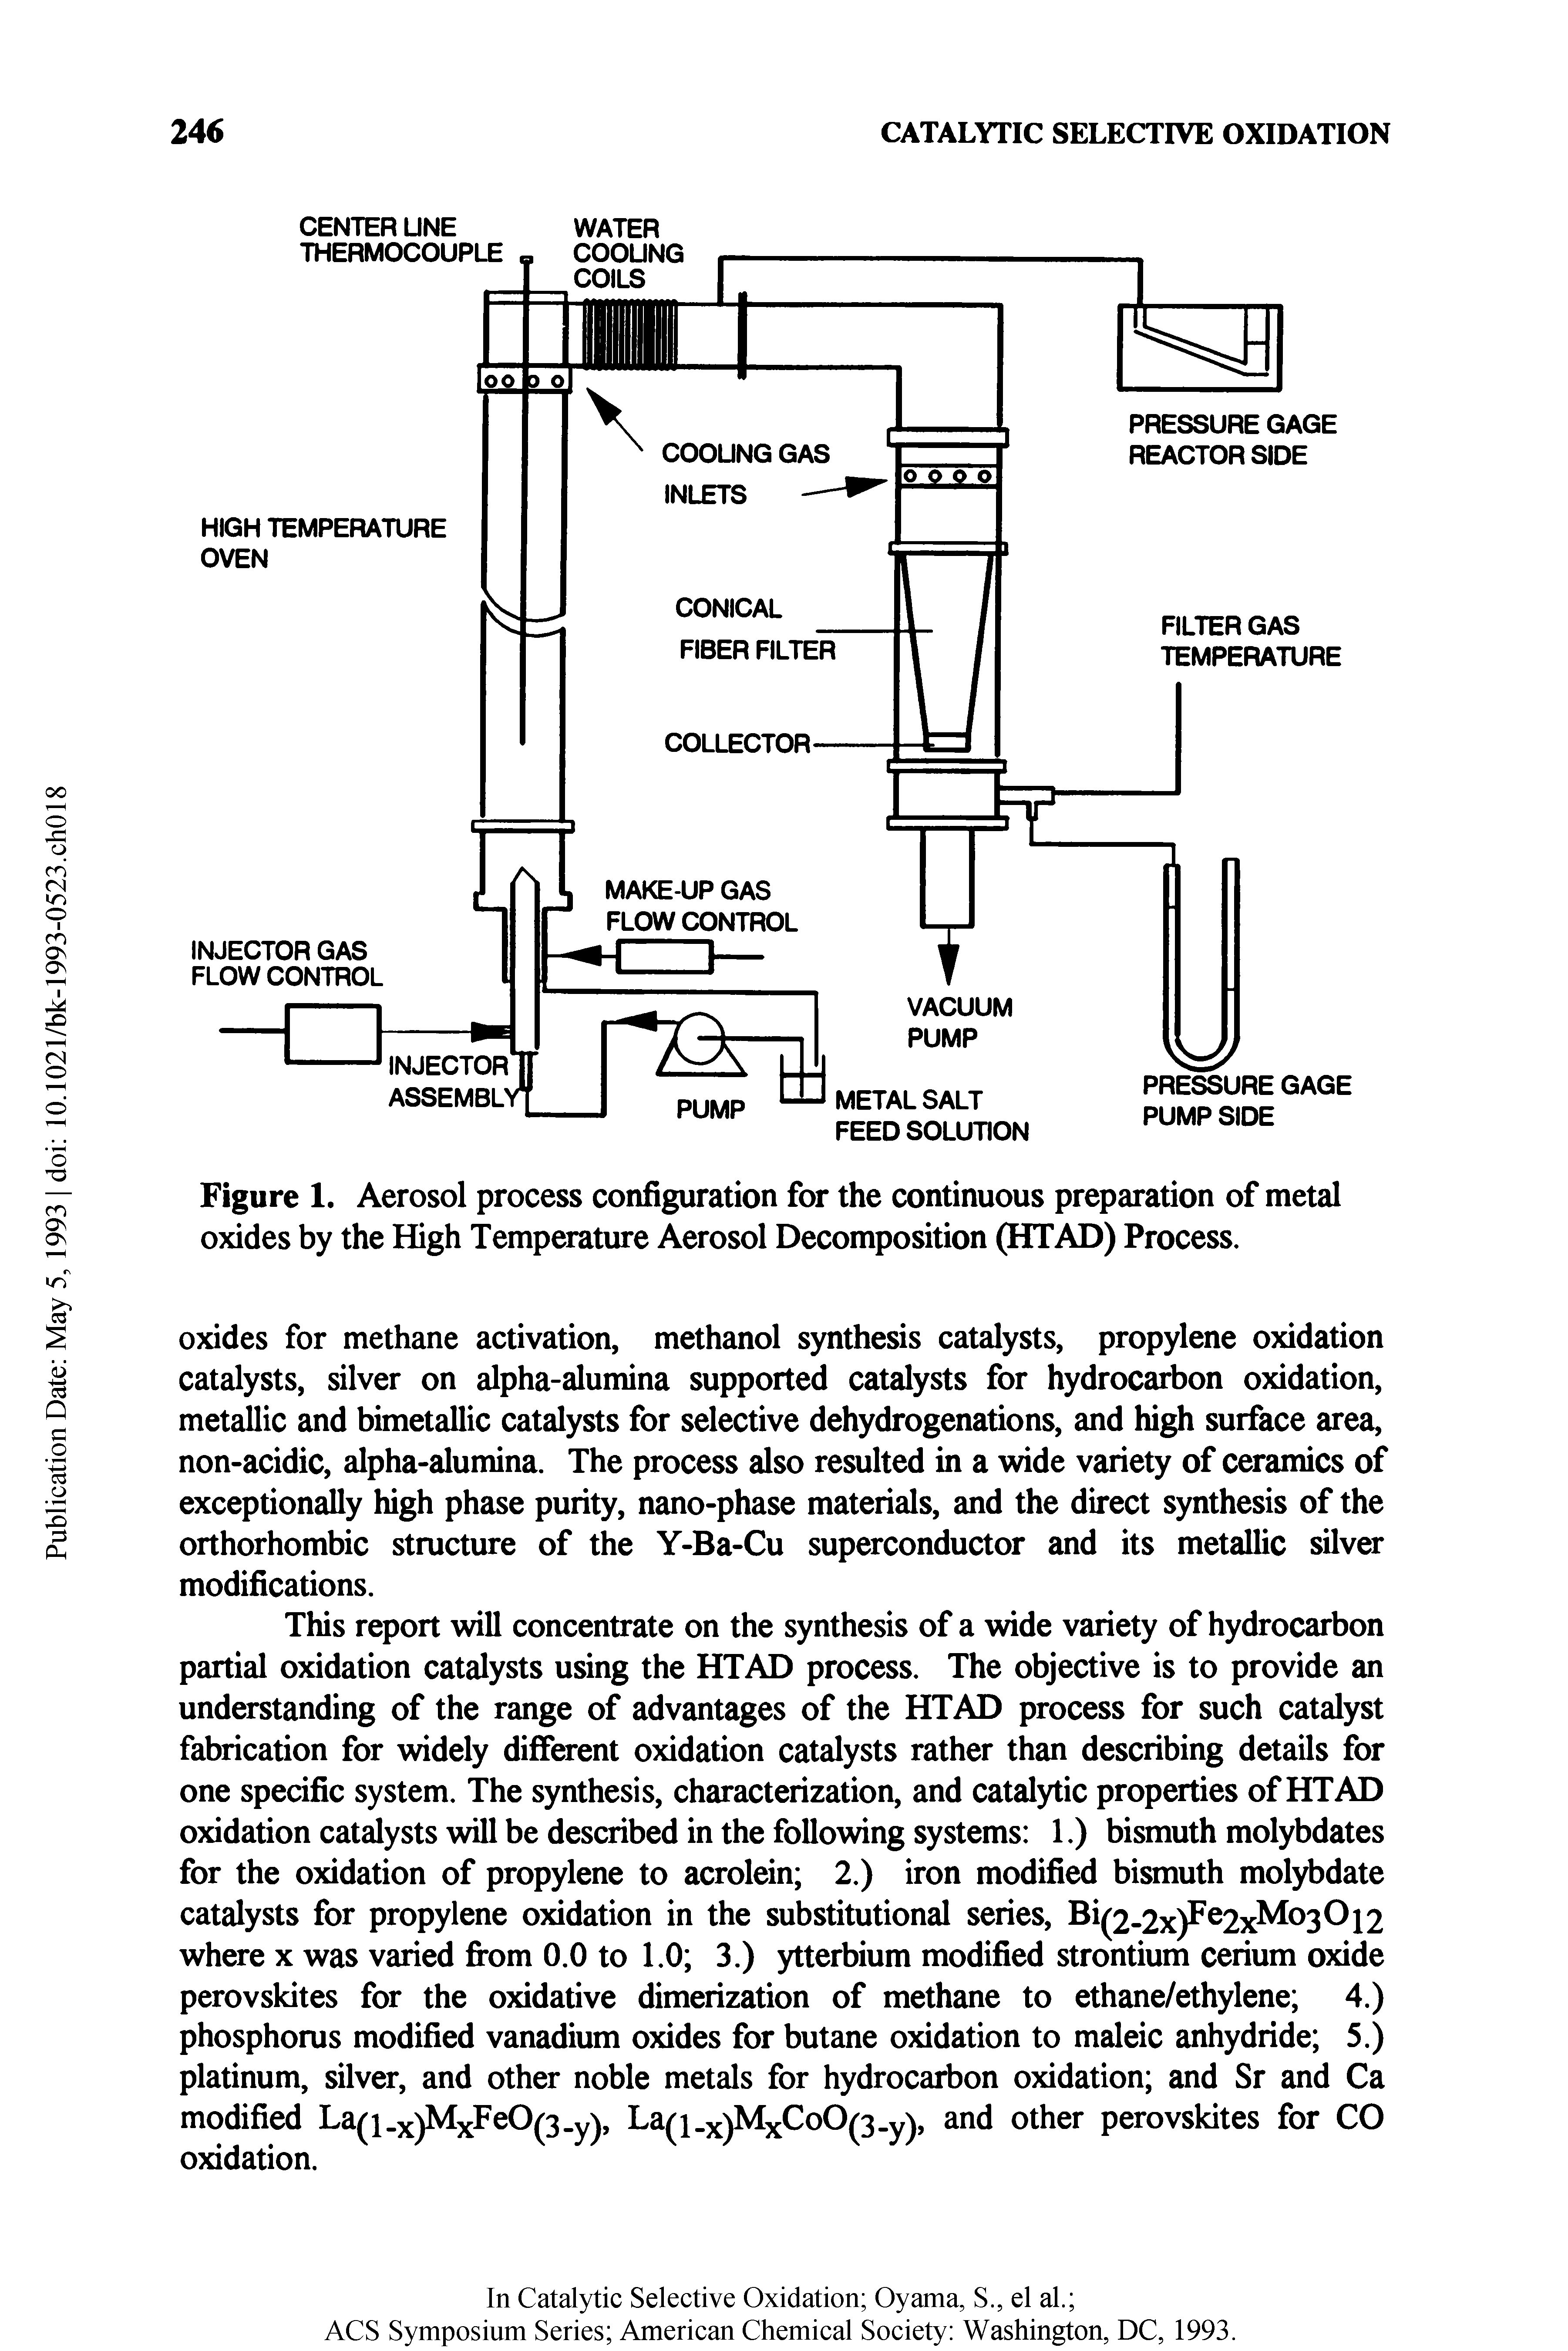 Figure 1. Aerosol process configuration for the continuous preparation of metal oxides by the High Temperature Aerosol Decomposition (HTAD) Process.